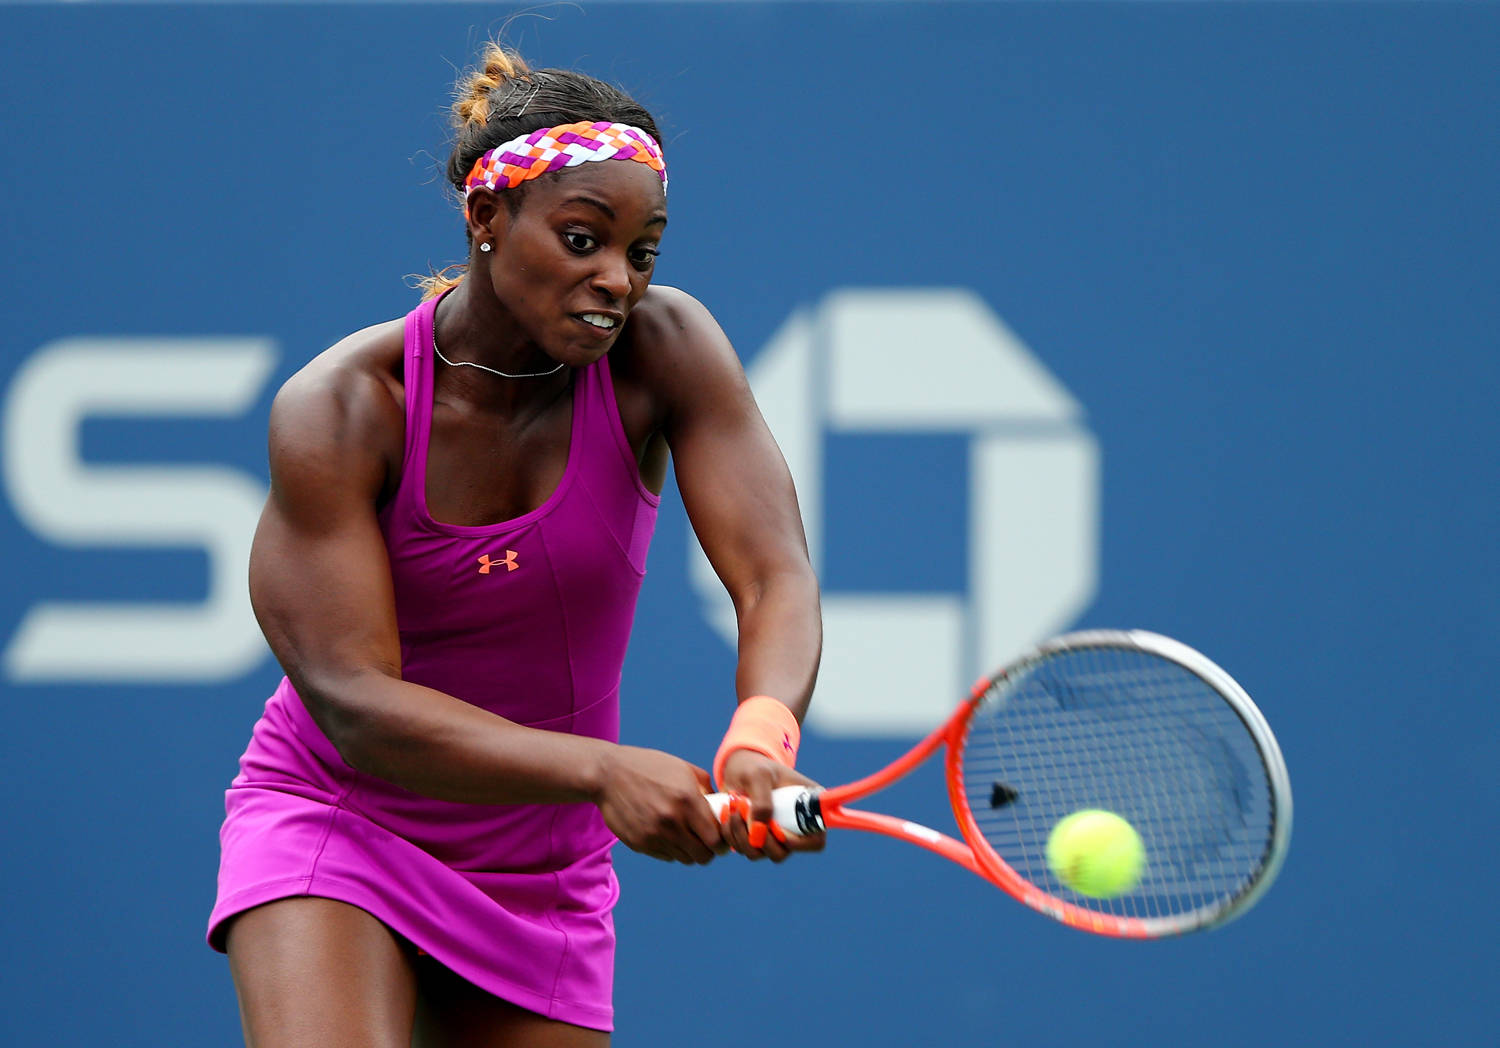 She allegedly unfollowed 20-year-old Sloane Stephens on Twitter after she b...